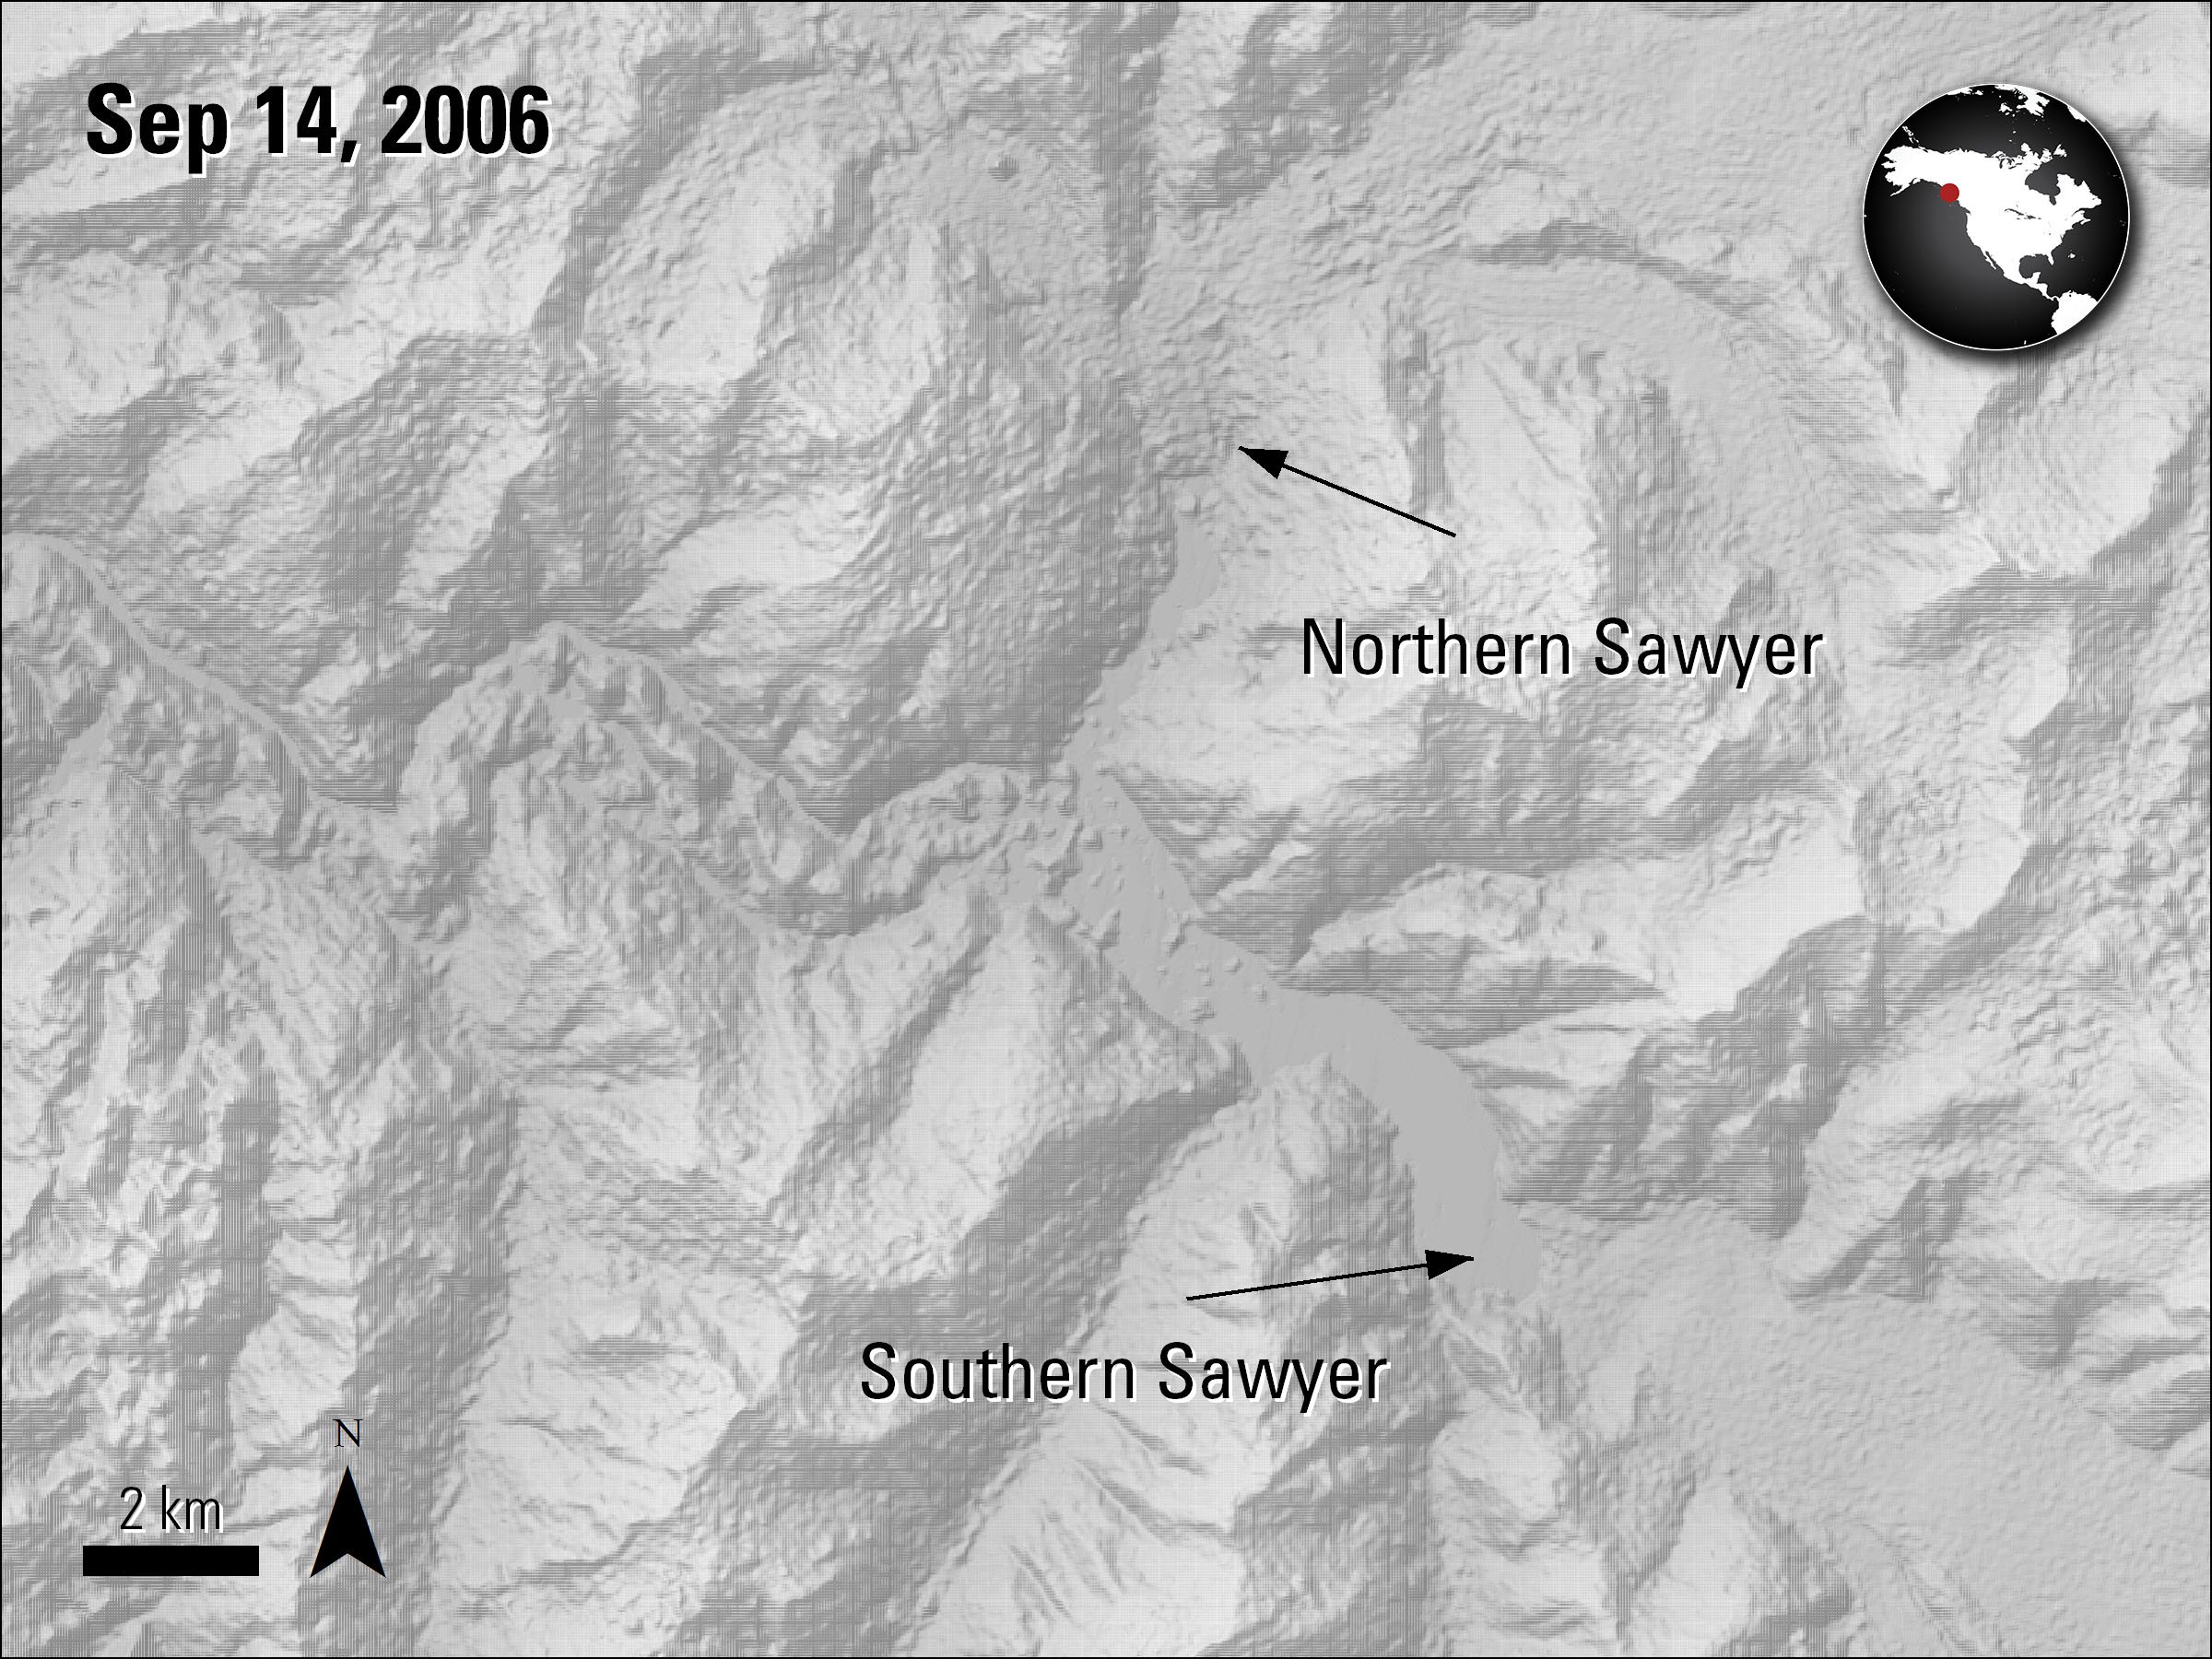 Terra ASTER Elevation imagery over Northern Sawyer and Southern Sawyer glaciers in Alaska, acquired September 14, 2006..